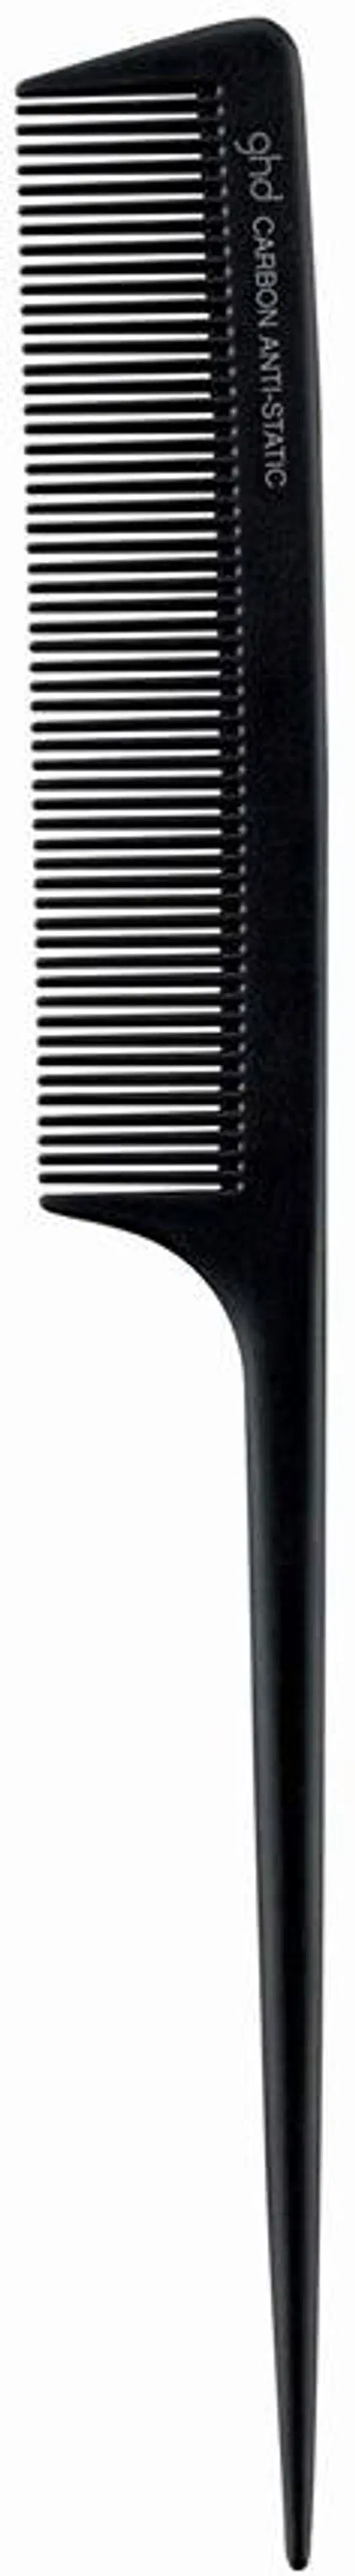 ghd Carbon Tail Comb (Sleeved)